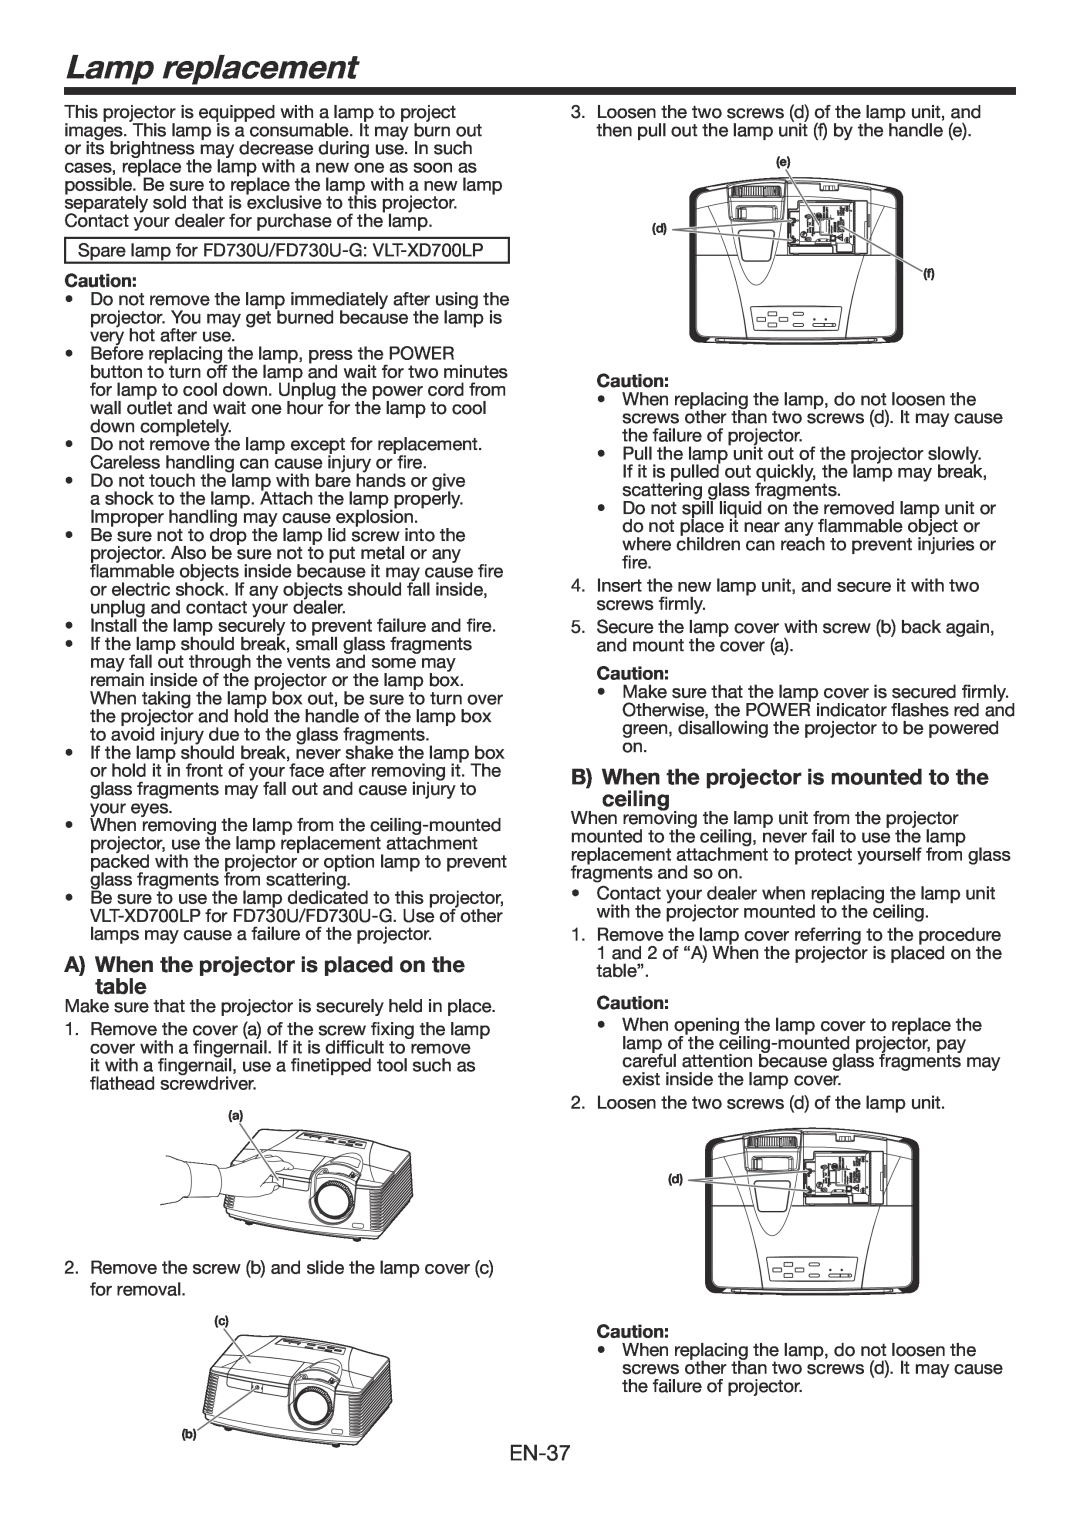 Mitsubishi Electronics FD730U-G user manual Lamp replacement, A When the projector is placed on the table, EN-37 